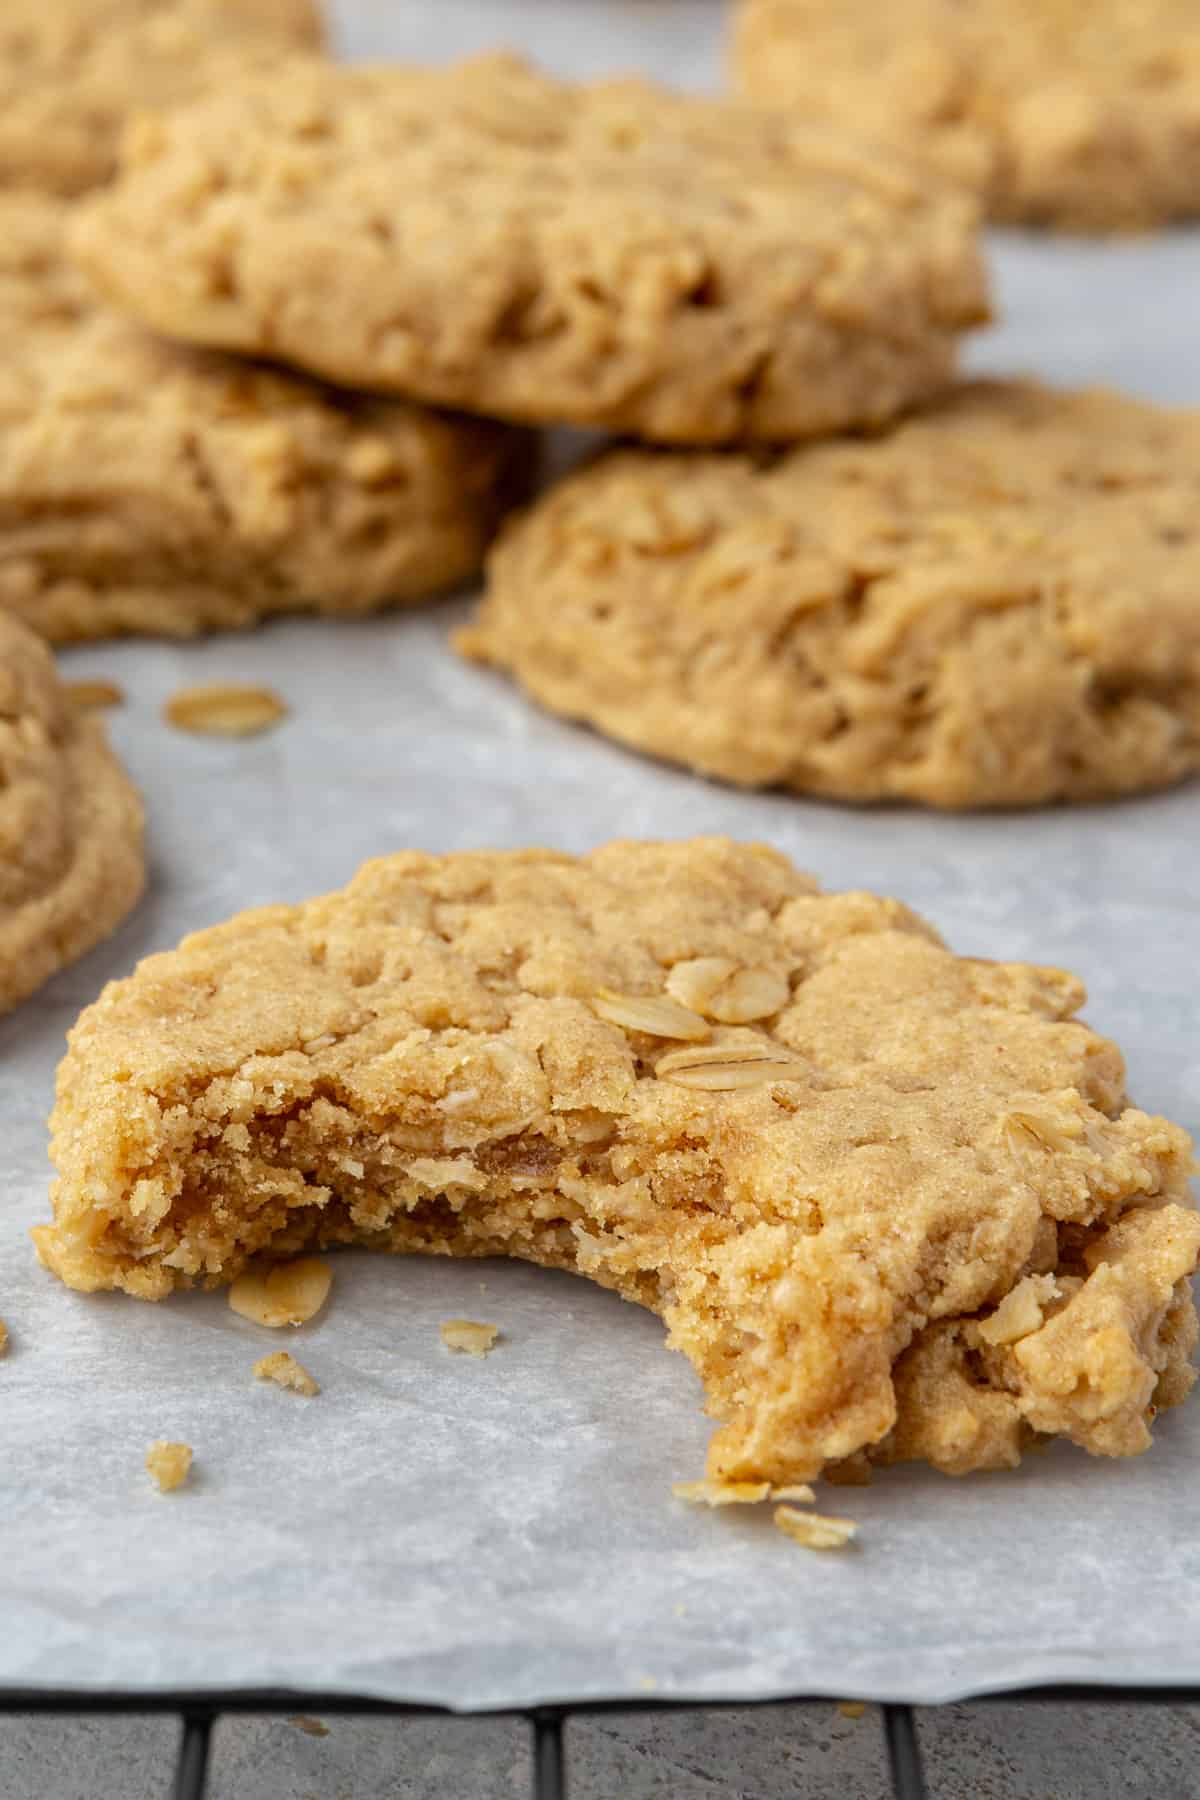 A peanut butter oatmeal cookie with a bite taken out with other cookies on parchment paper.